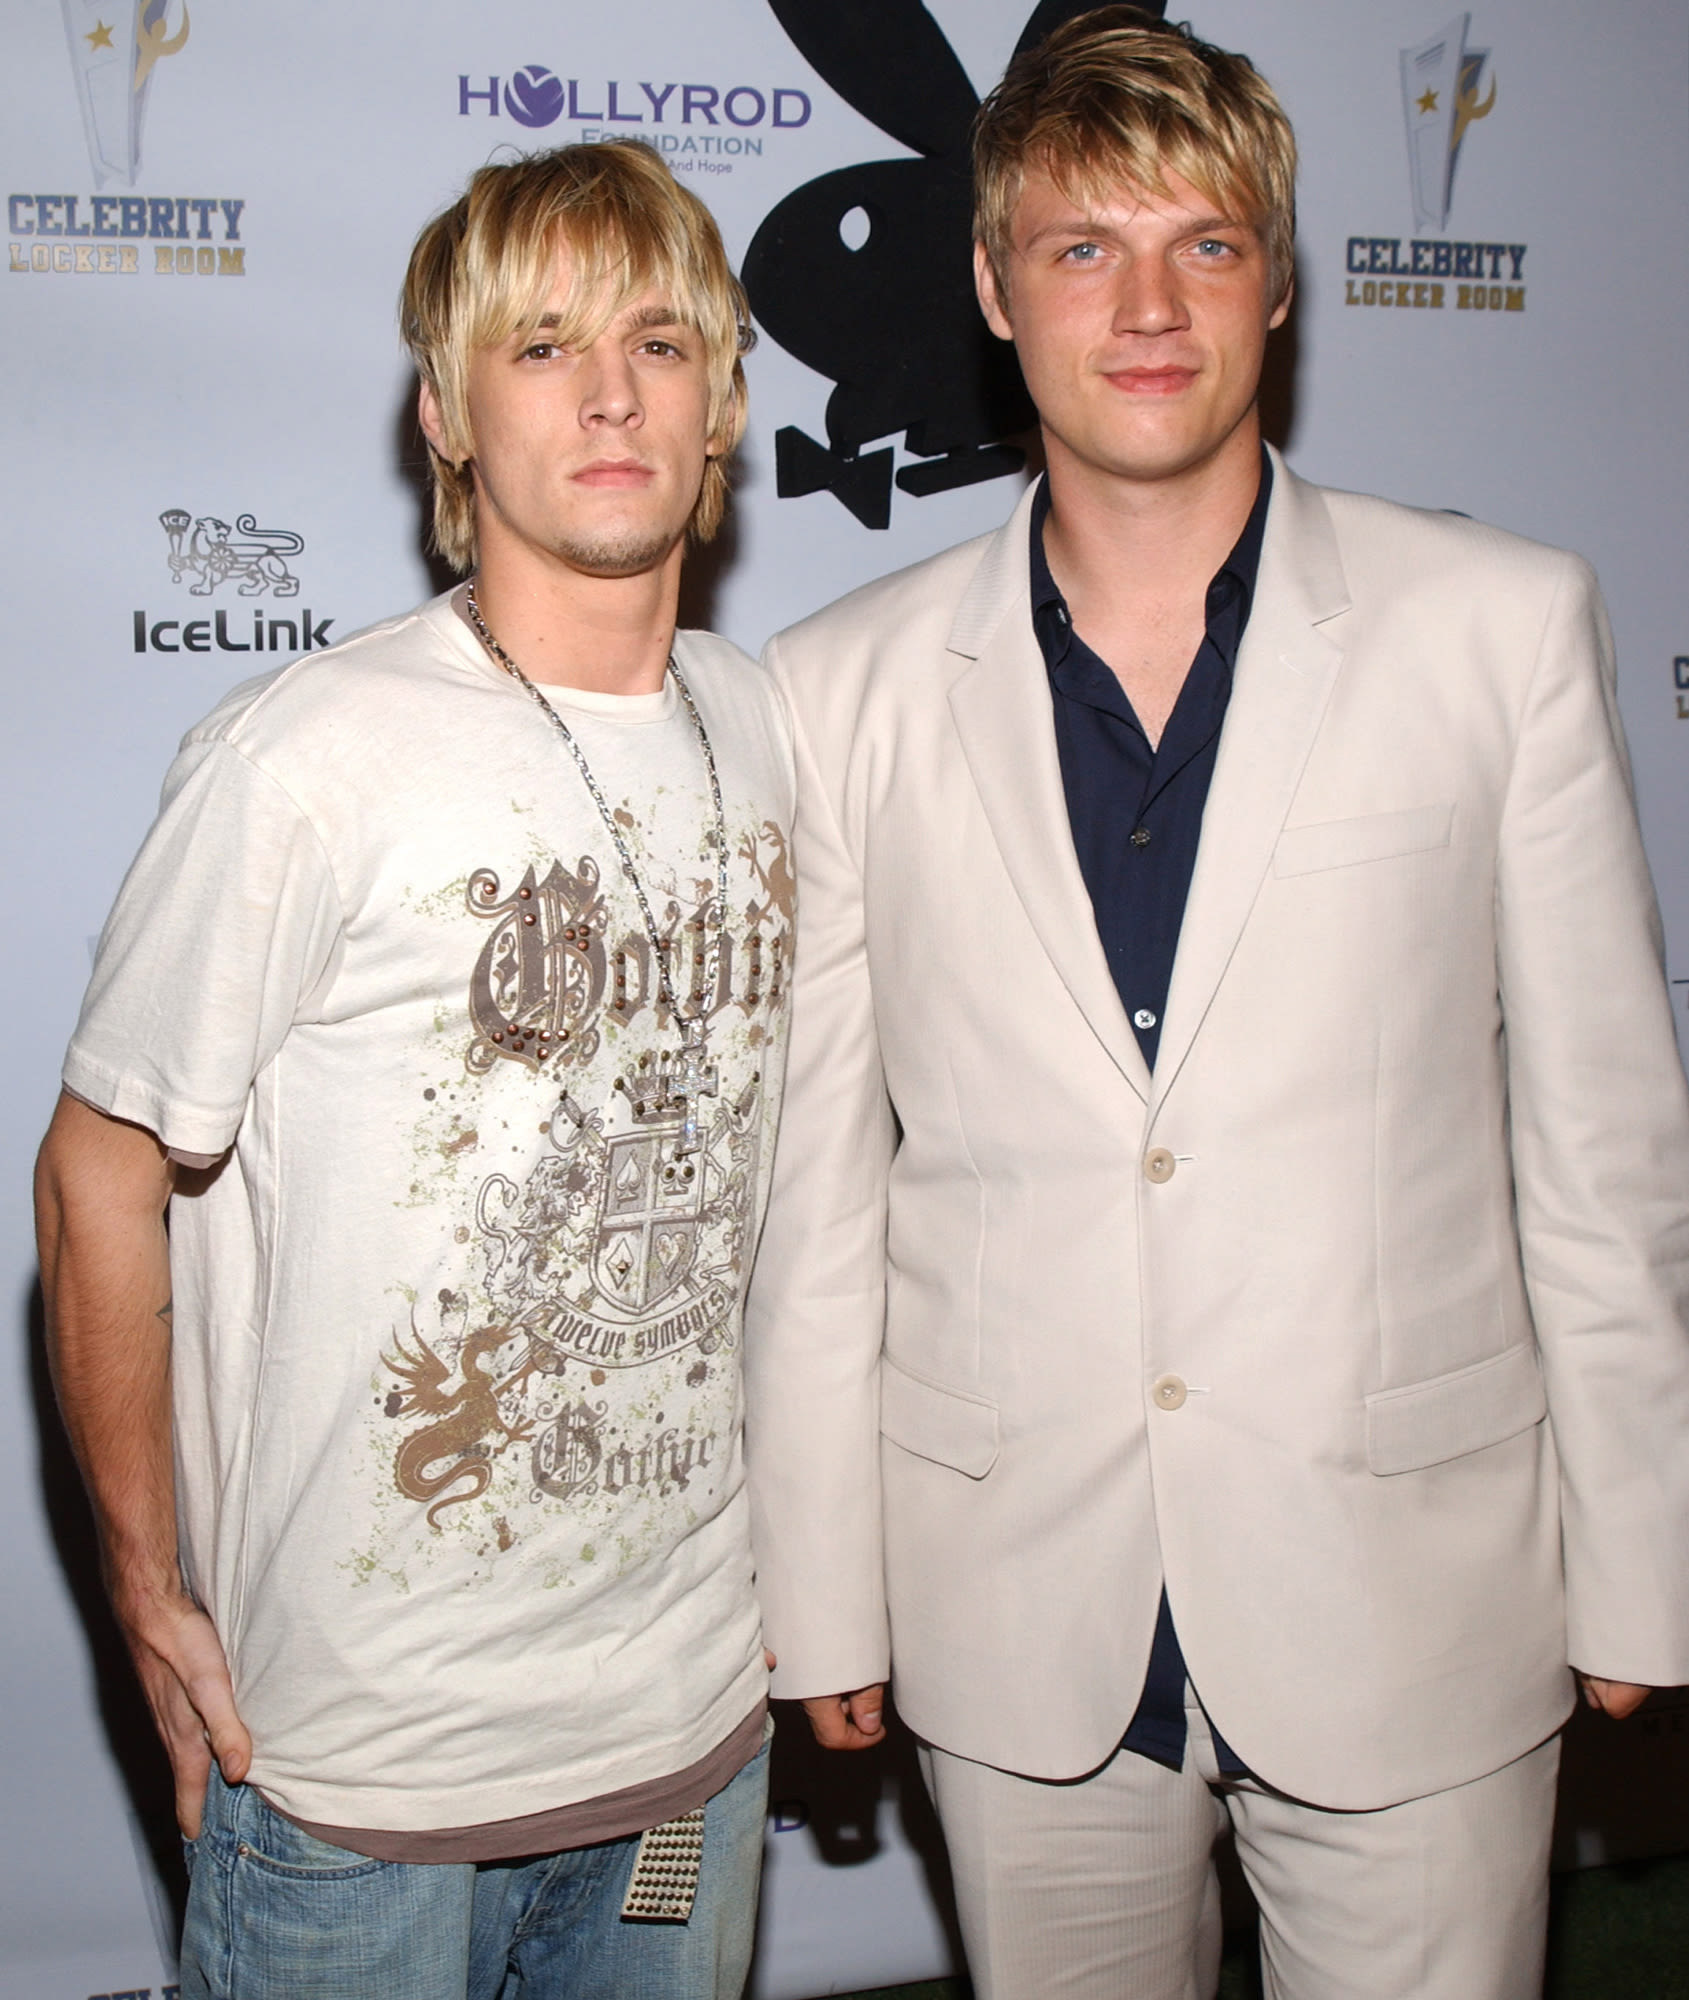 Nick Carter’s Scandals and Aaron Carter’s Death to Be Subject of Upcoming Docuseries